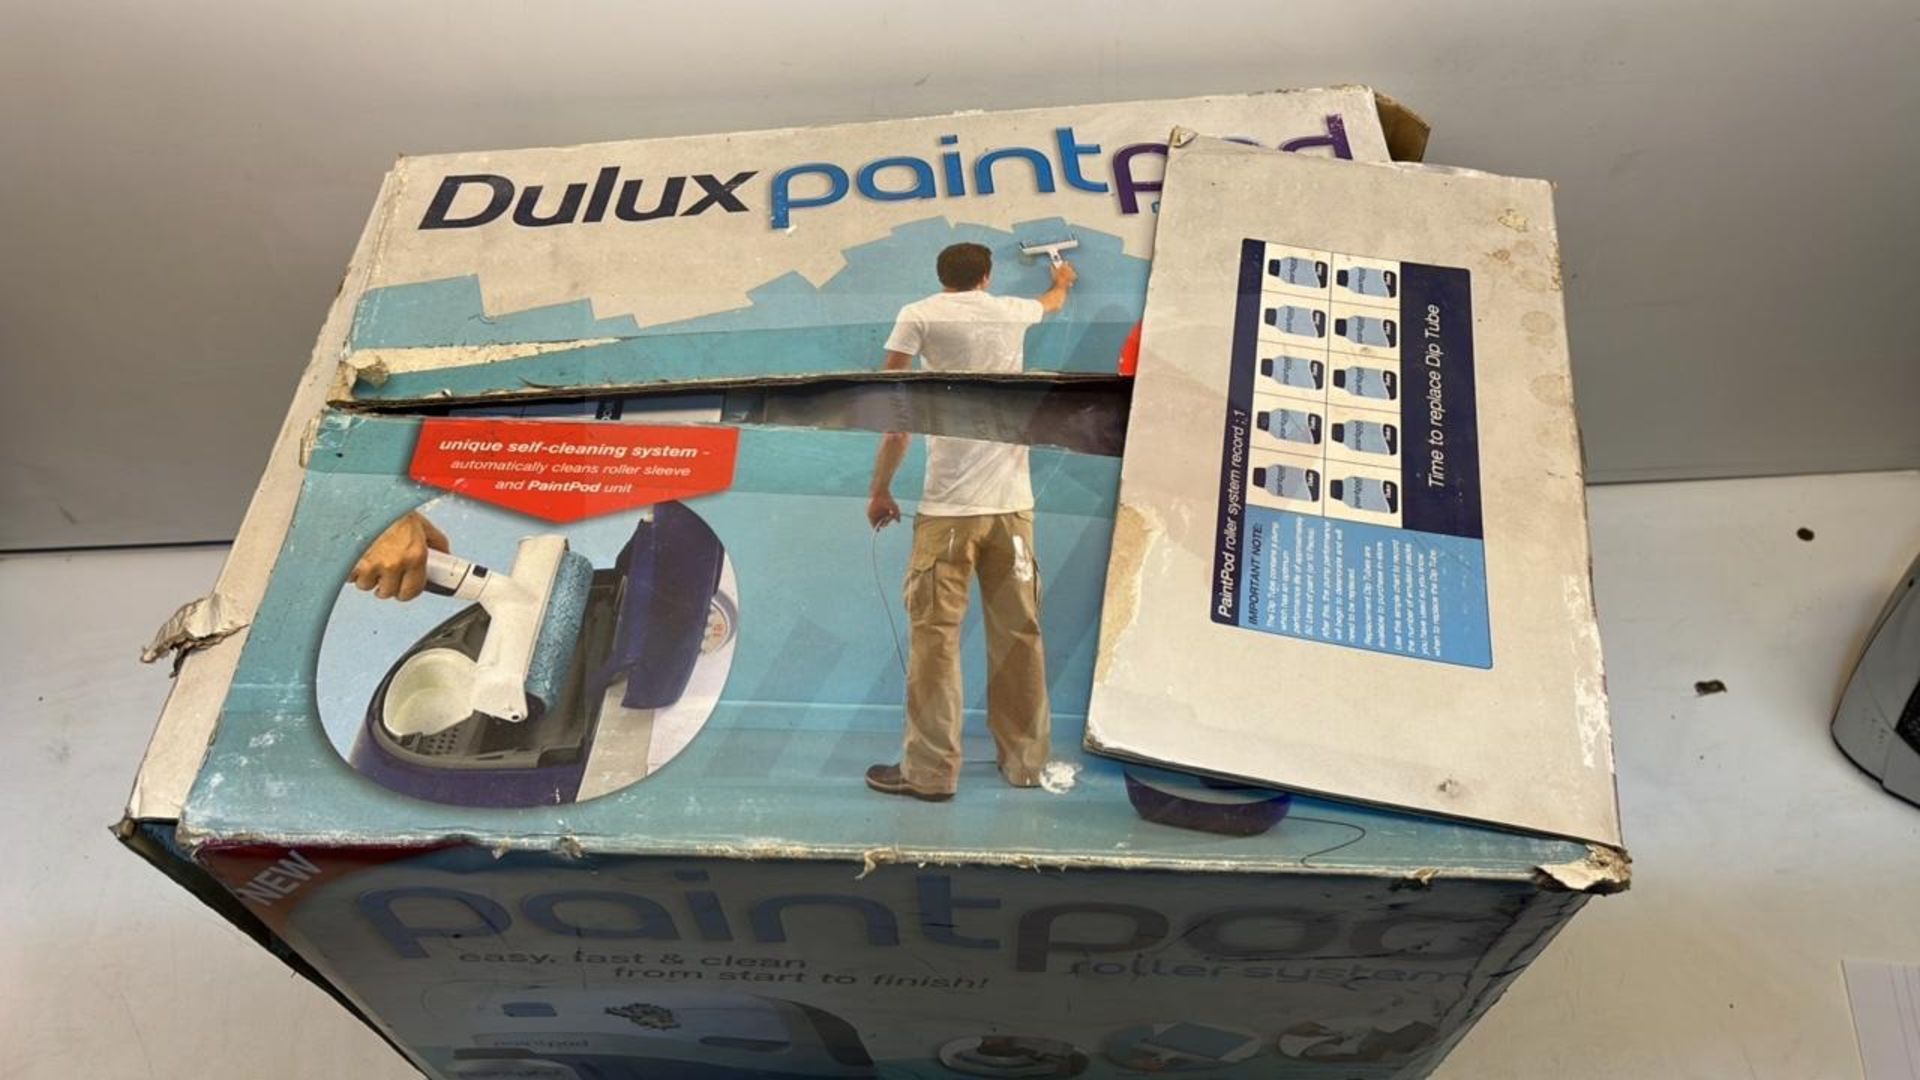 Dulux A466000150N Paint Pod Roller System - Image 2 of 3